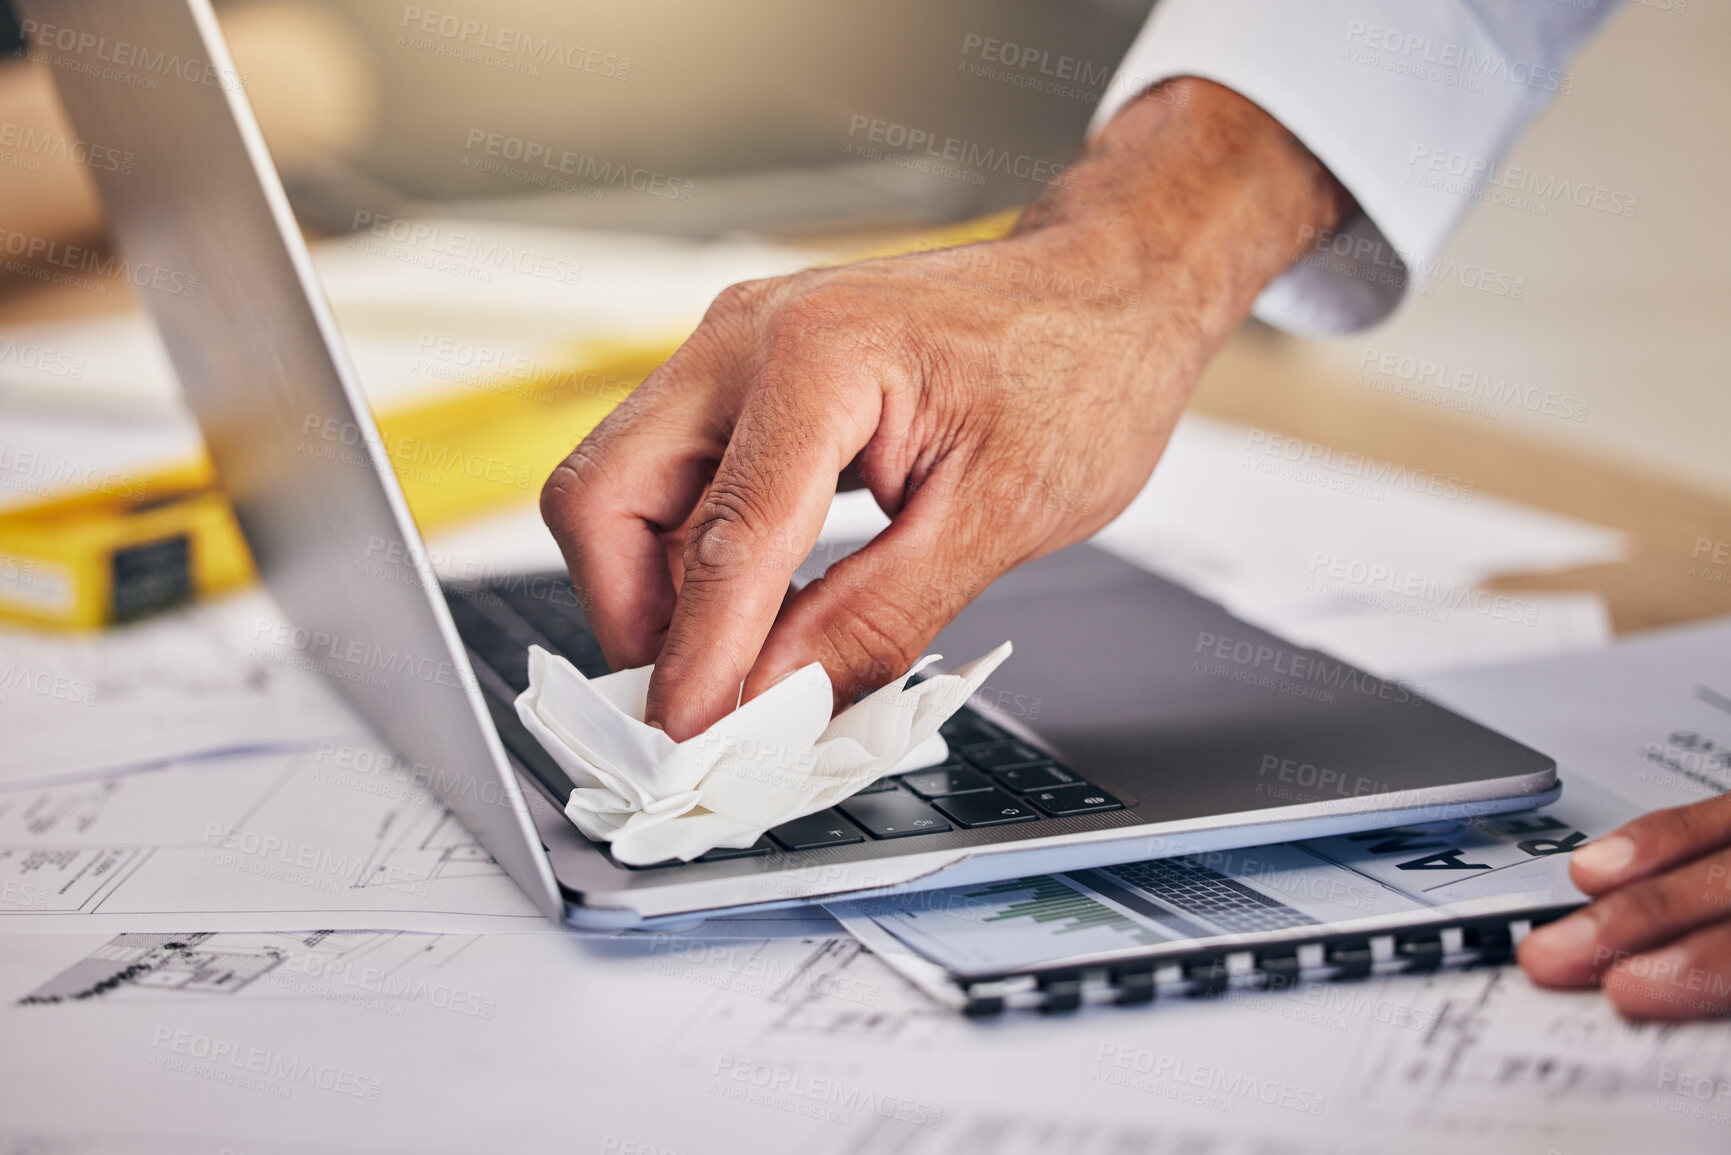 Buy stock photo Hand with cloth, keyboard on laptop and cleaning dust or dirt from workspace with blueprint and architecture. Wiping, tissue and engineer with computer cleaner for safety care, caution and paperwork.